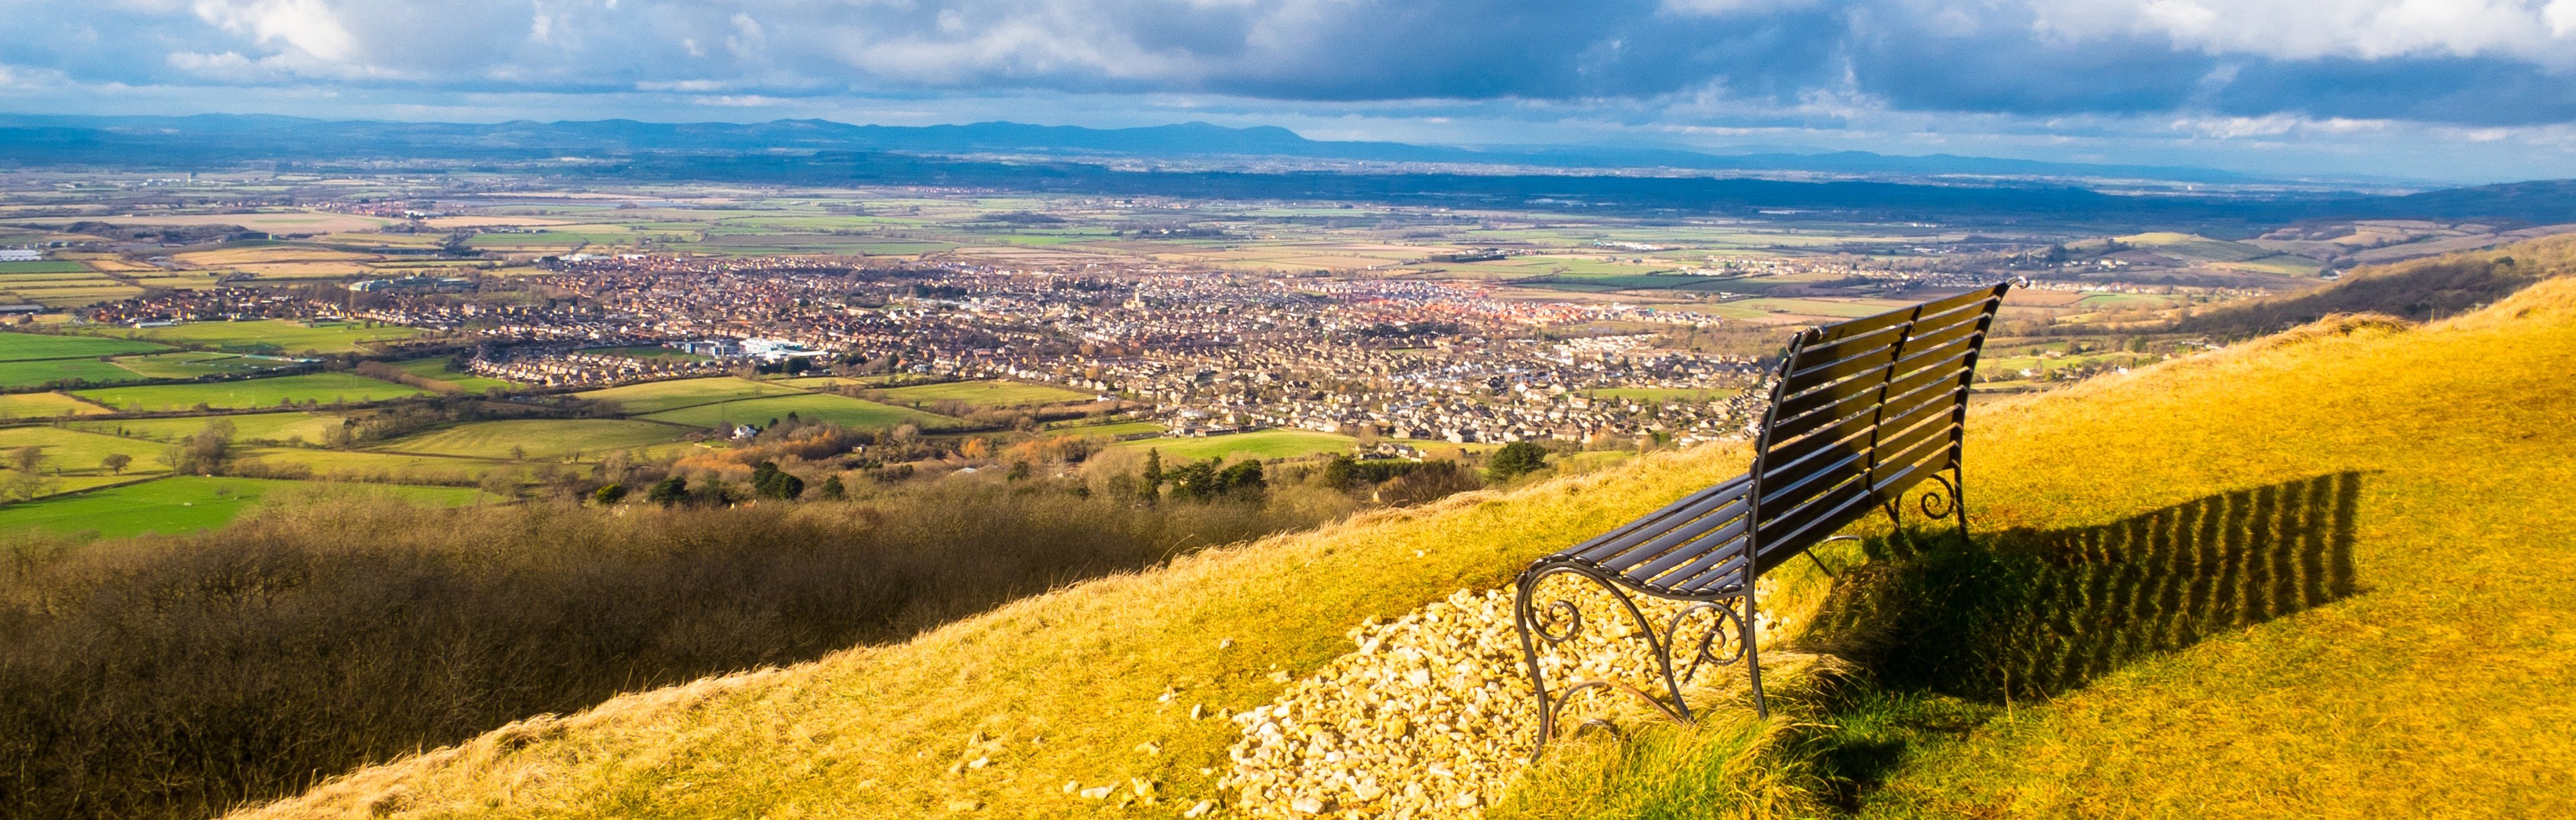 Bench overlooking hills in Cotswolds where Angelfish is based